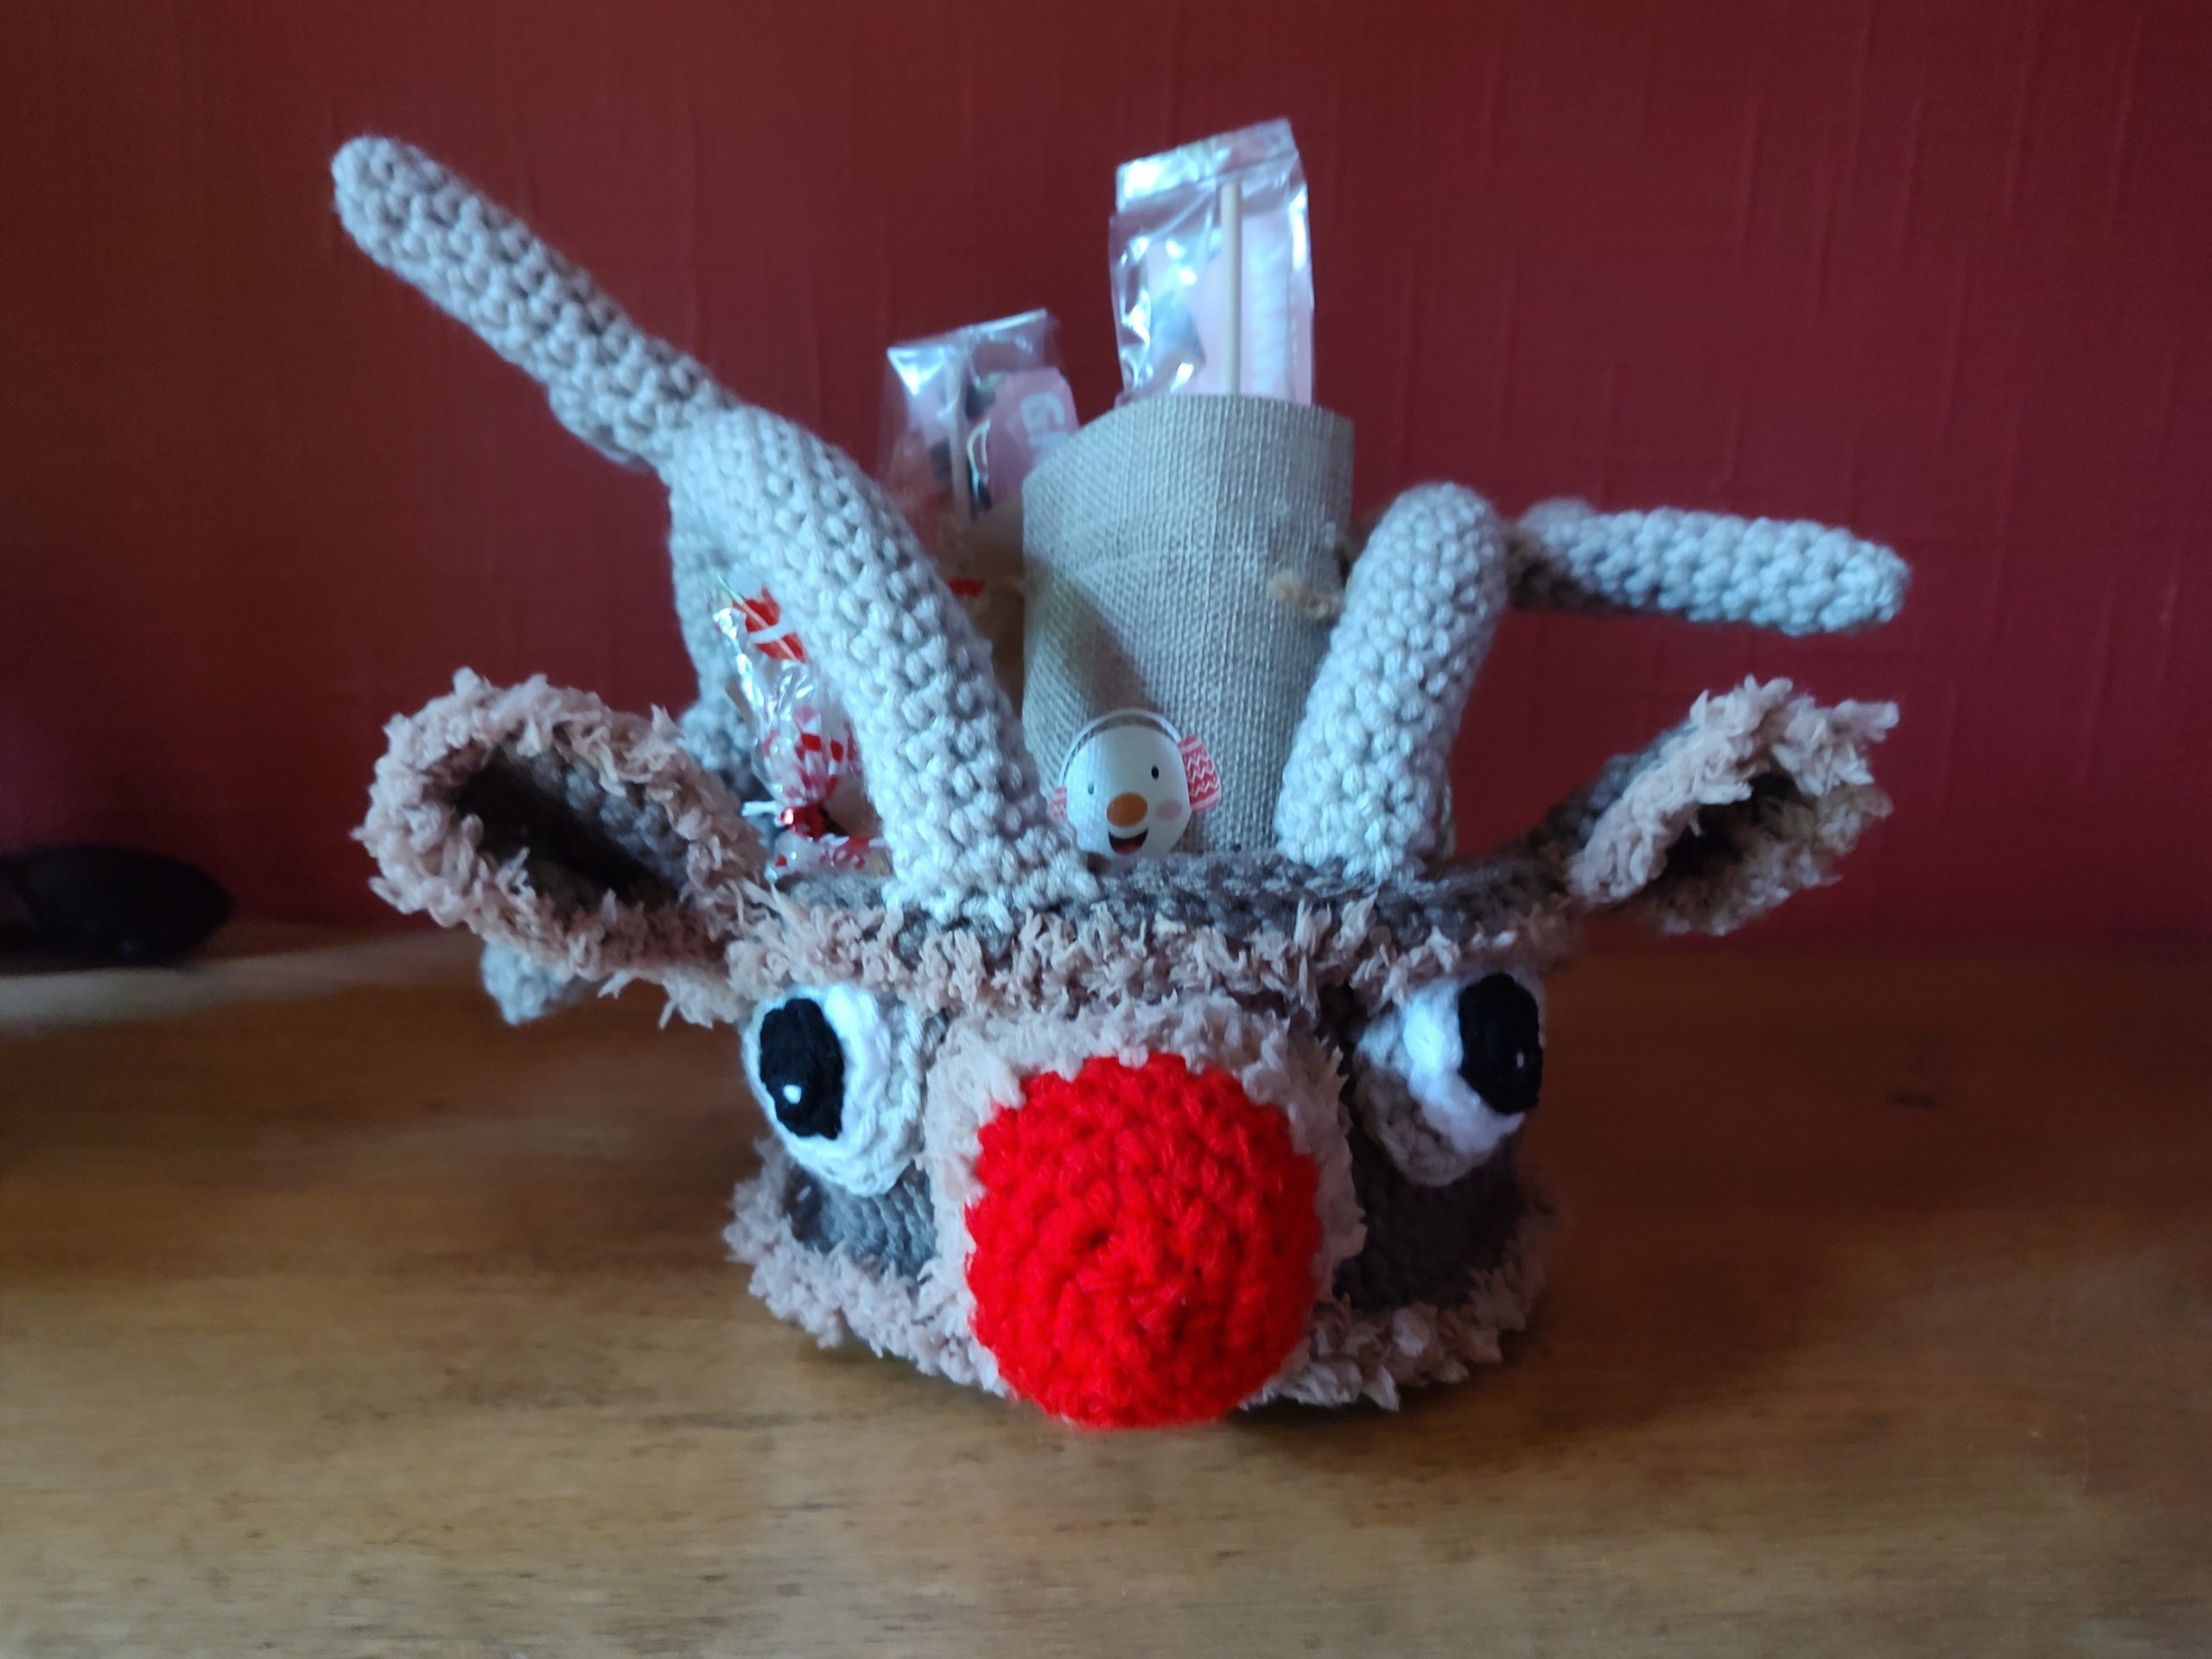 A crochet treat basket made to look like Rudolph the Red Nose Reindeer. The basket is face on showing his large red nose, big eyes and ears. The basket handles are his antlers and the ears, round the nose and bottom and top trim of the basket is made using furry brown yarn. The basket is filled with little Christmas treats